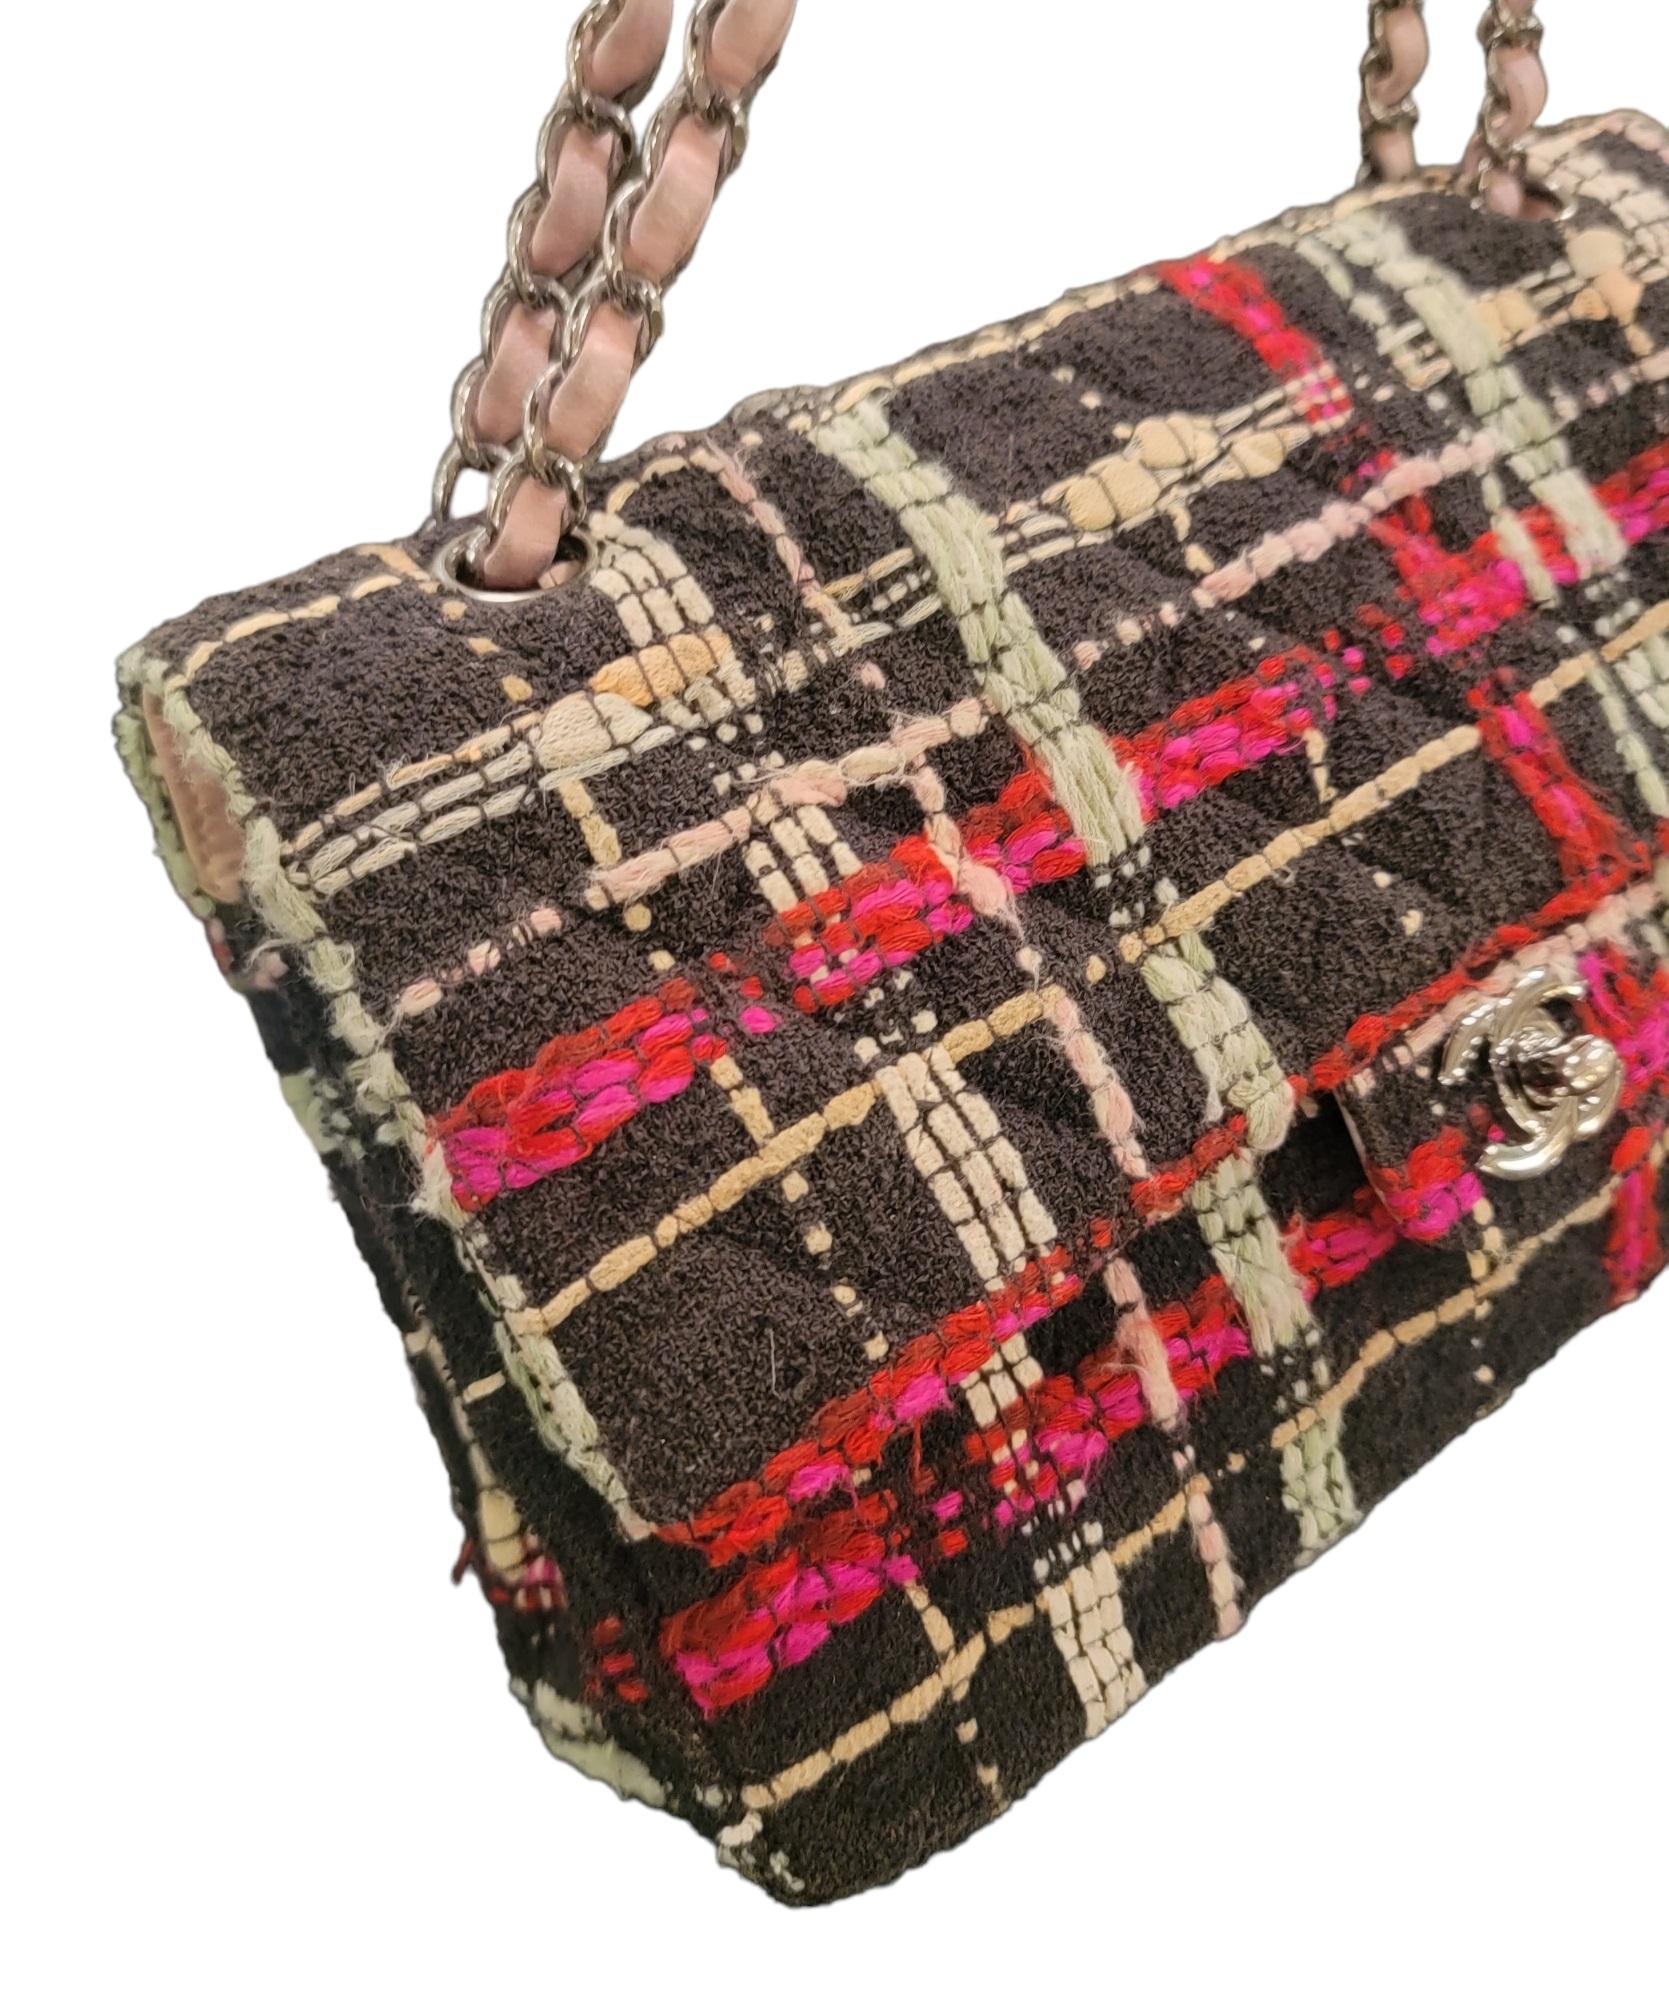 Auth Classic Chanel Runway Tweed Flap Bag For Sale 2